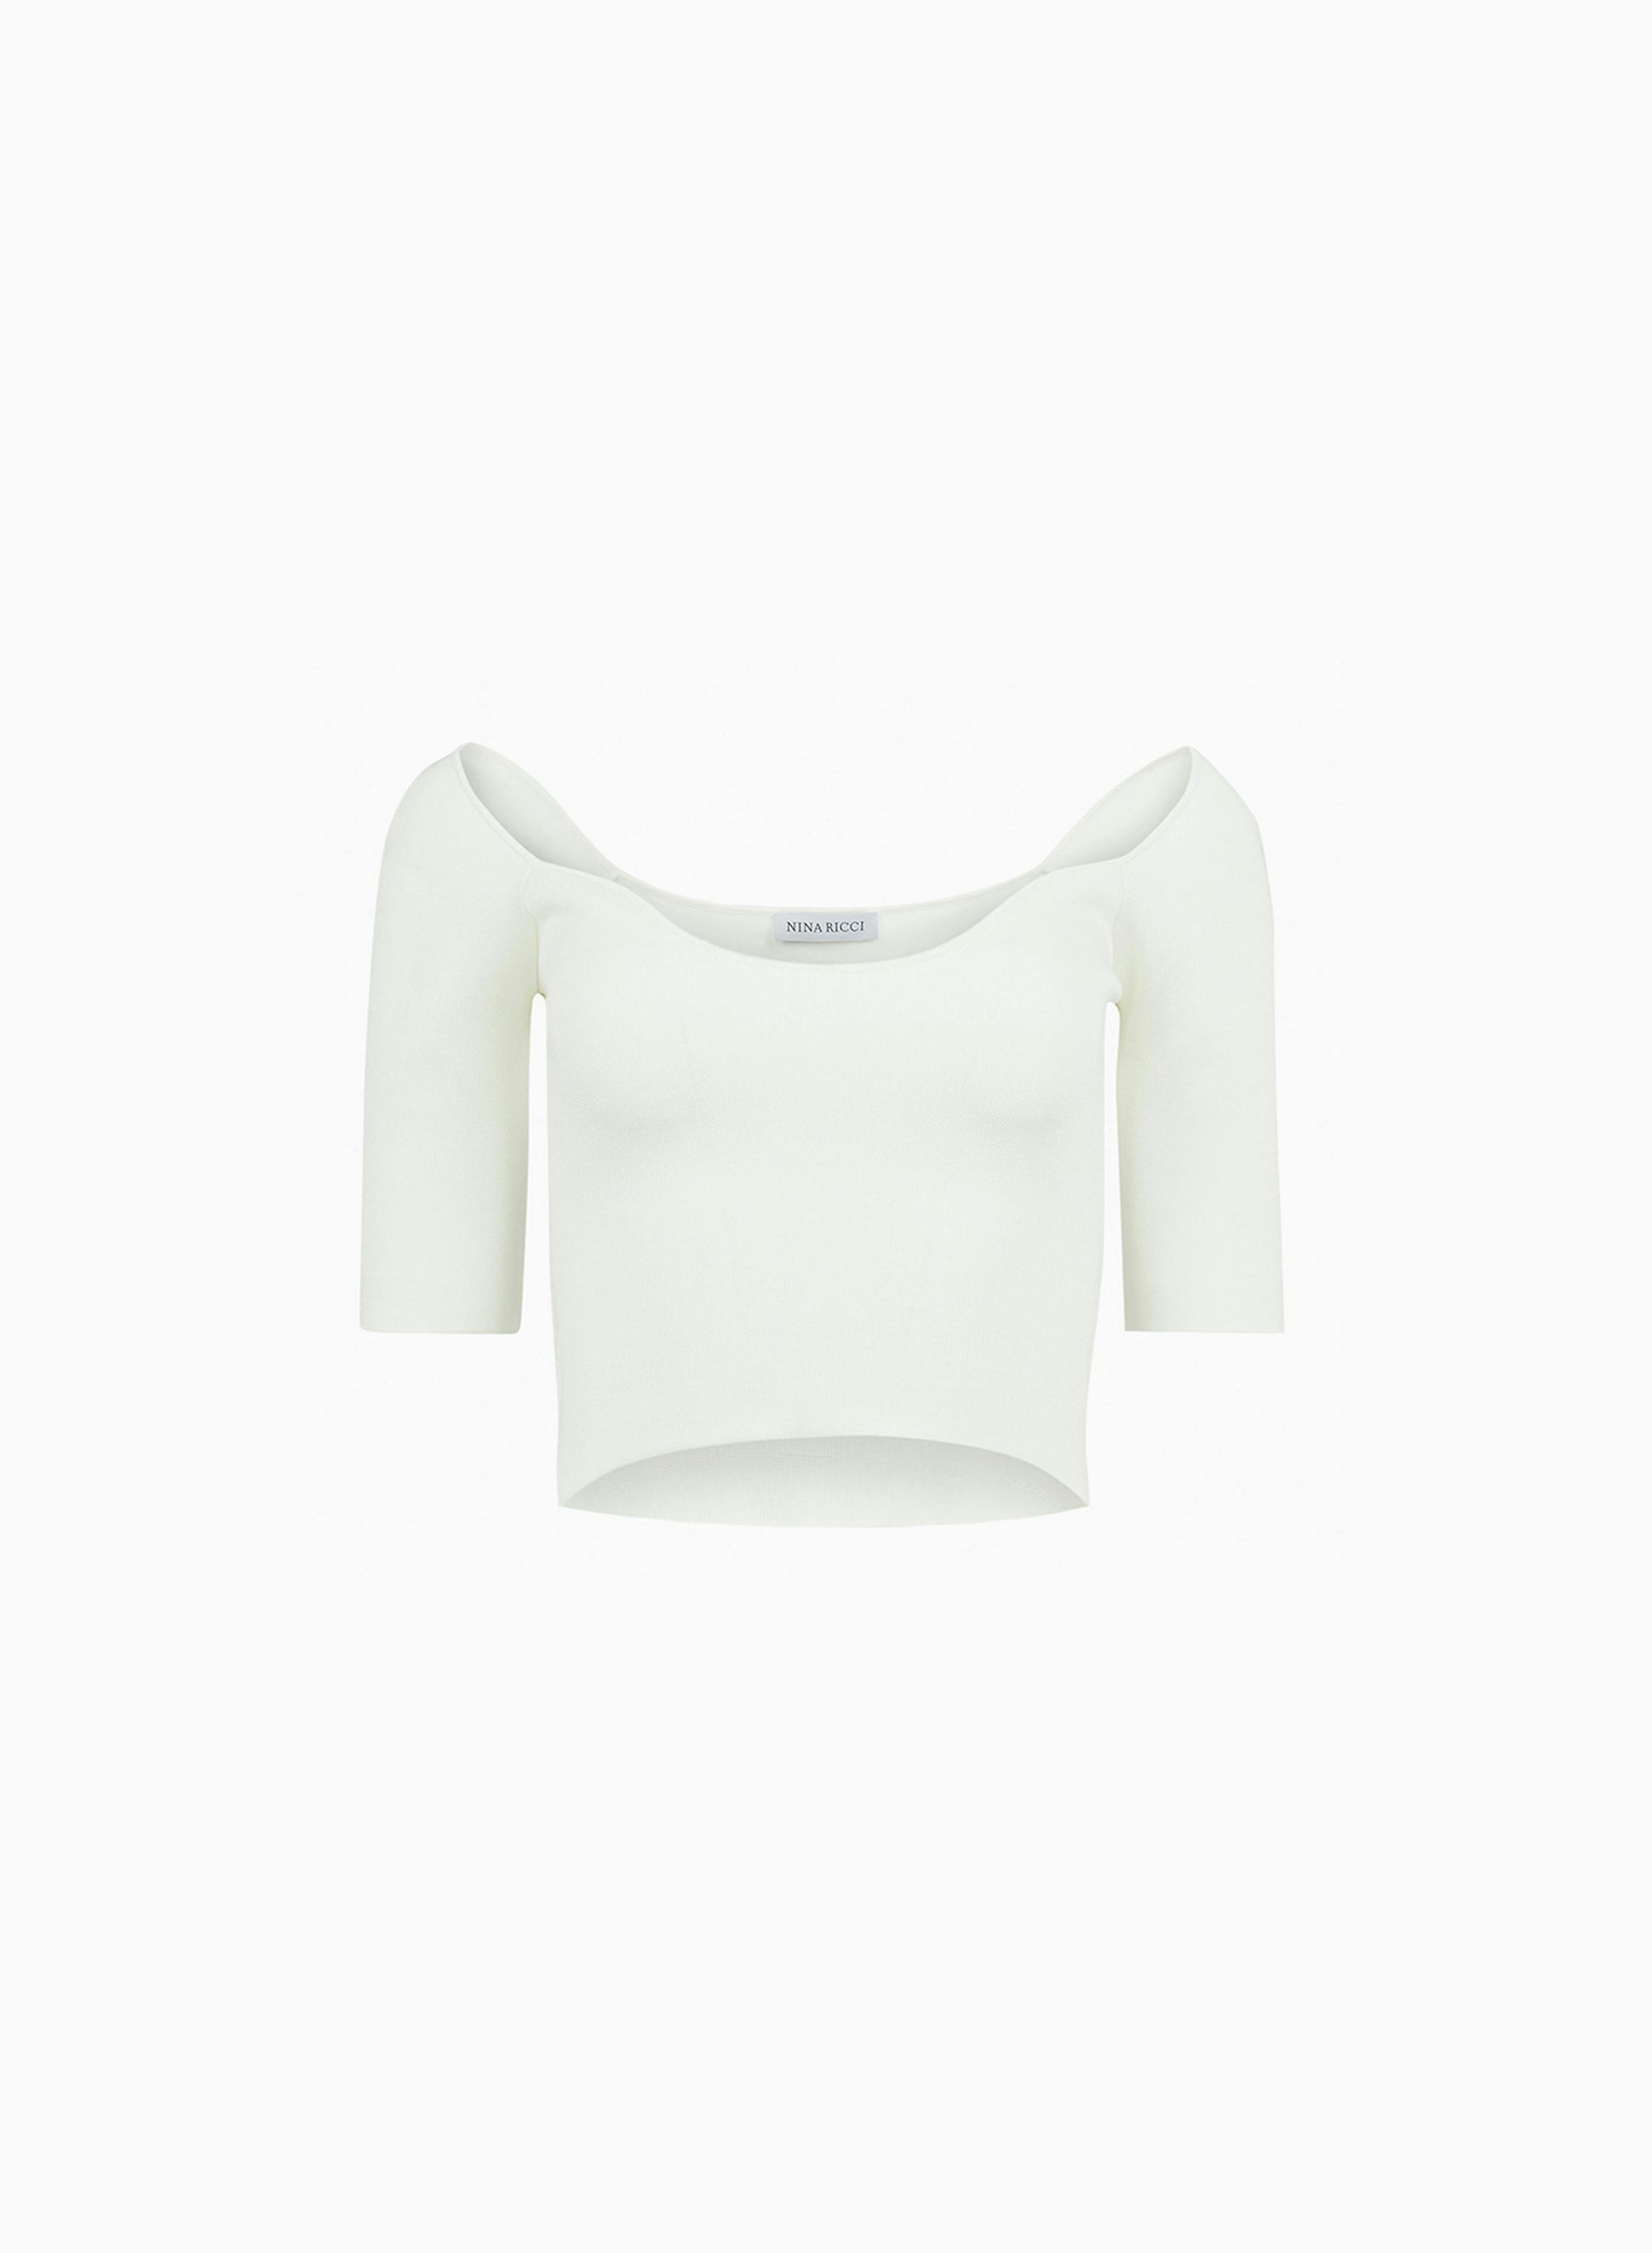 Heart neckline cropped top in off white - Nina Ricci